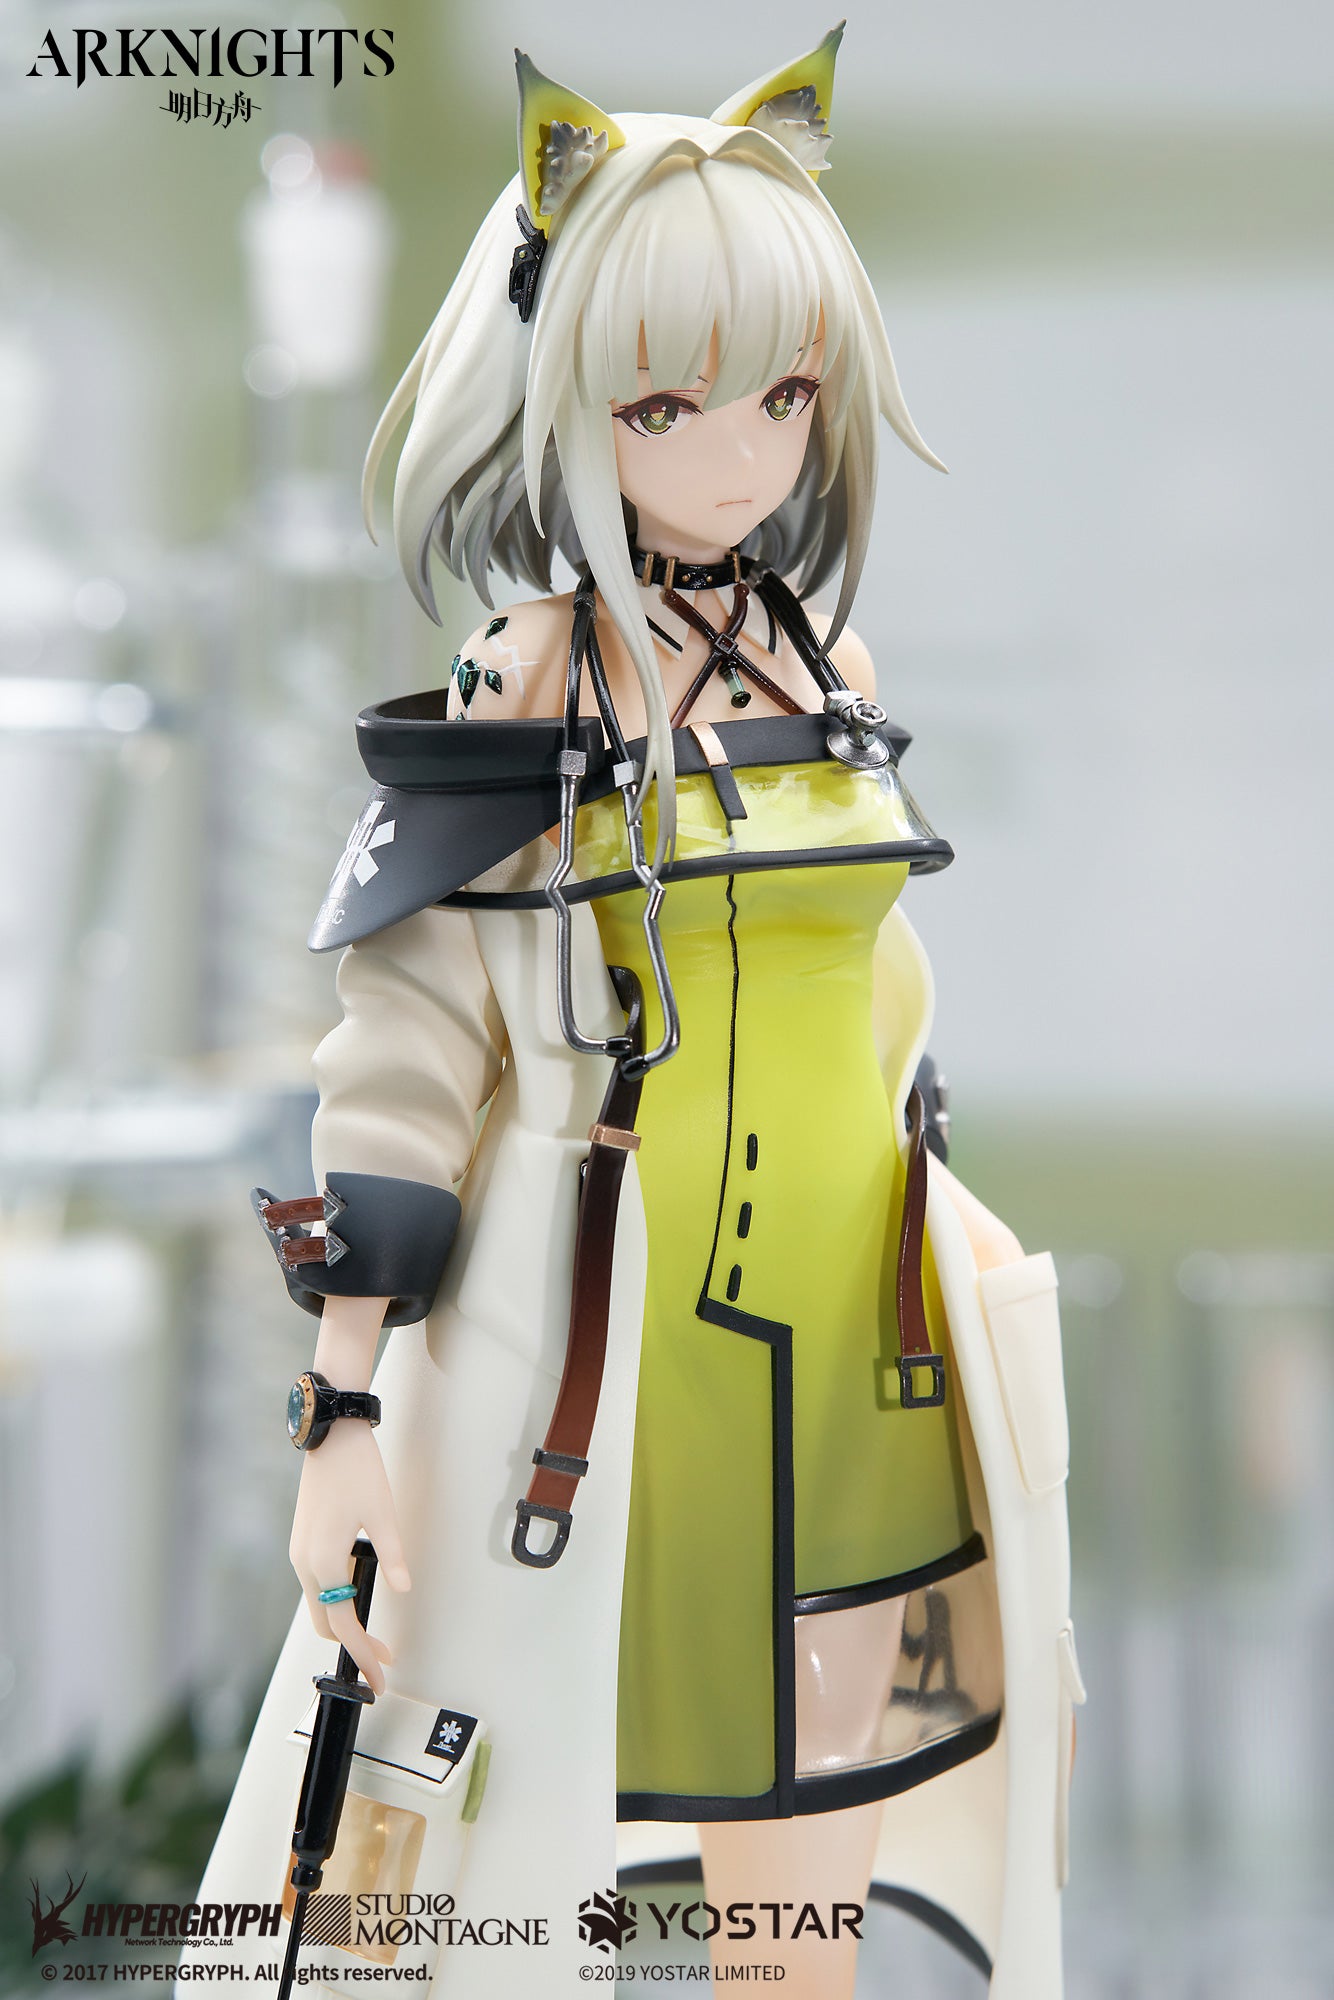 Arknights 1/7 Scale Painted Figure